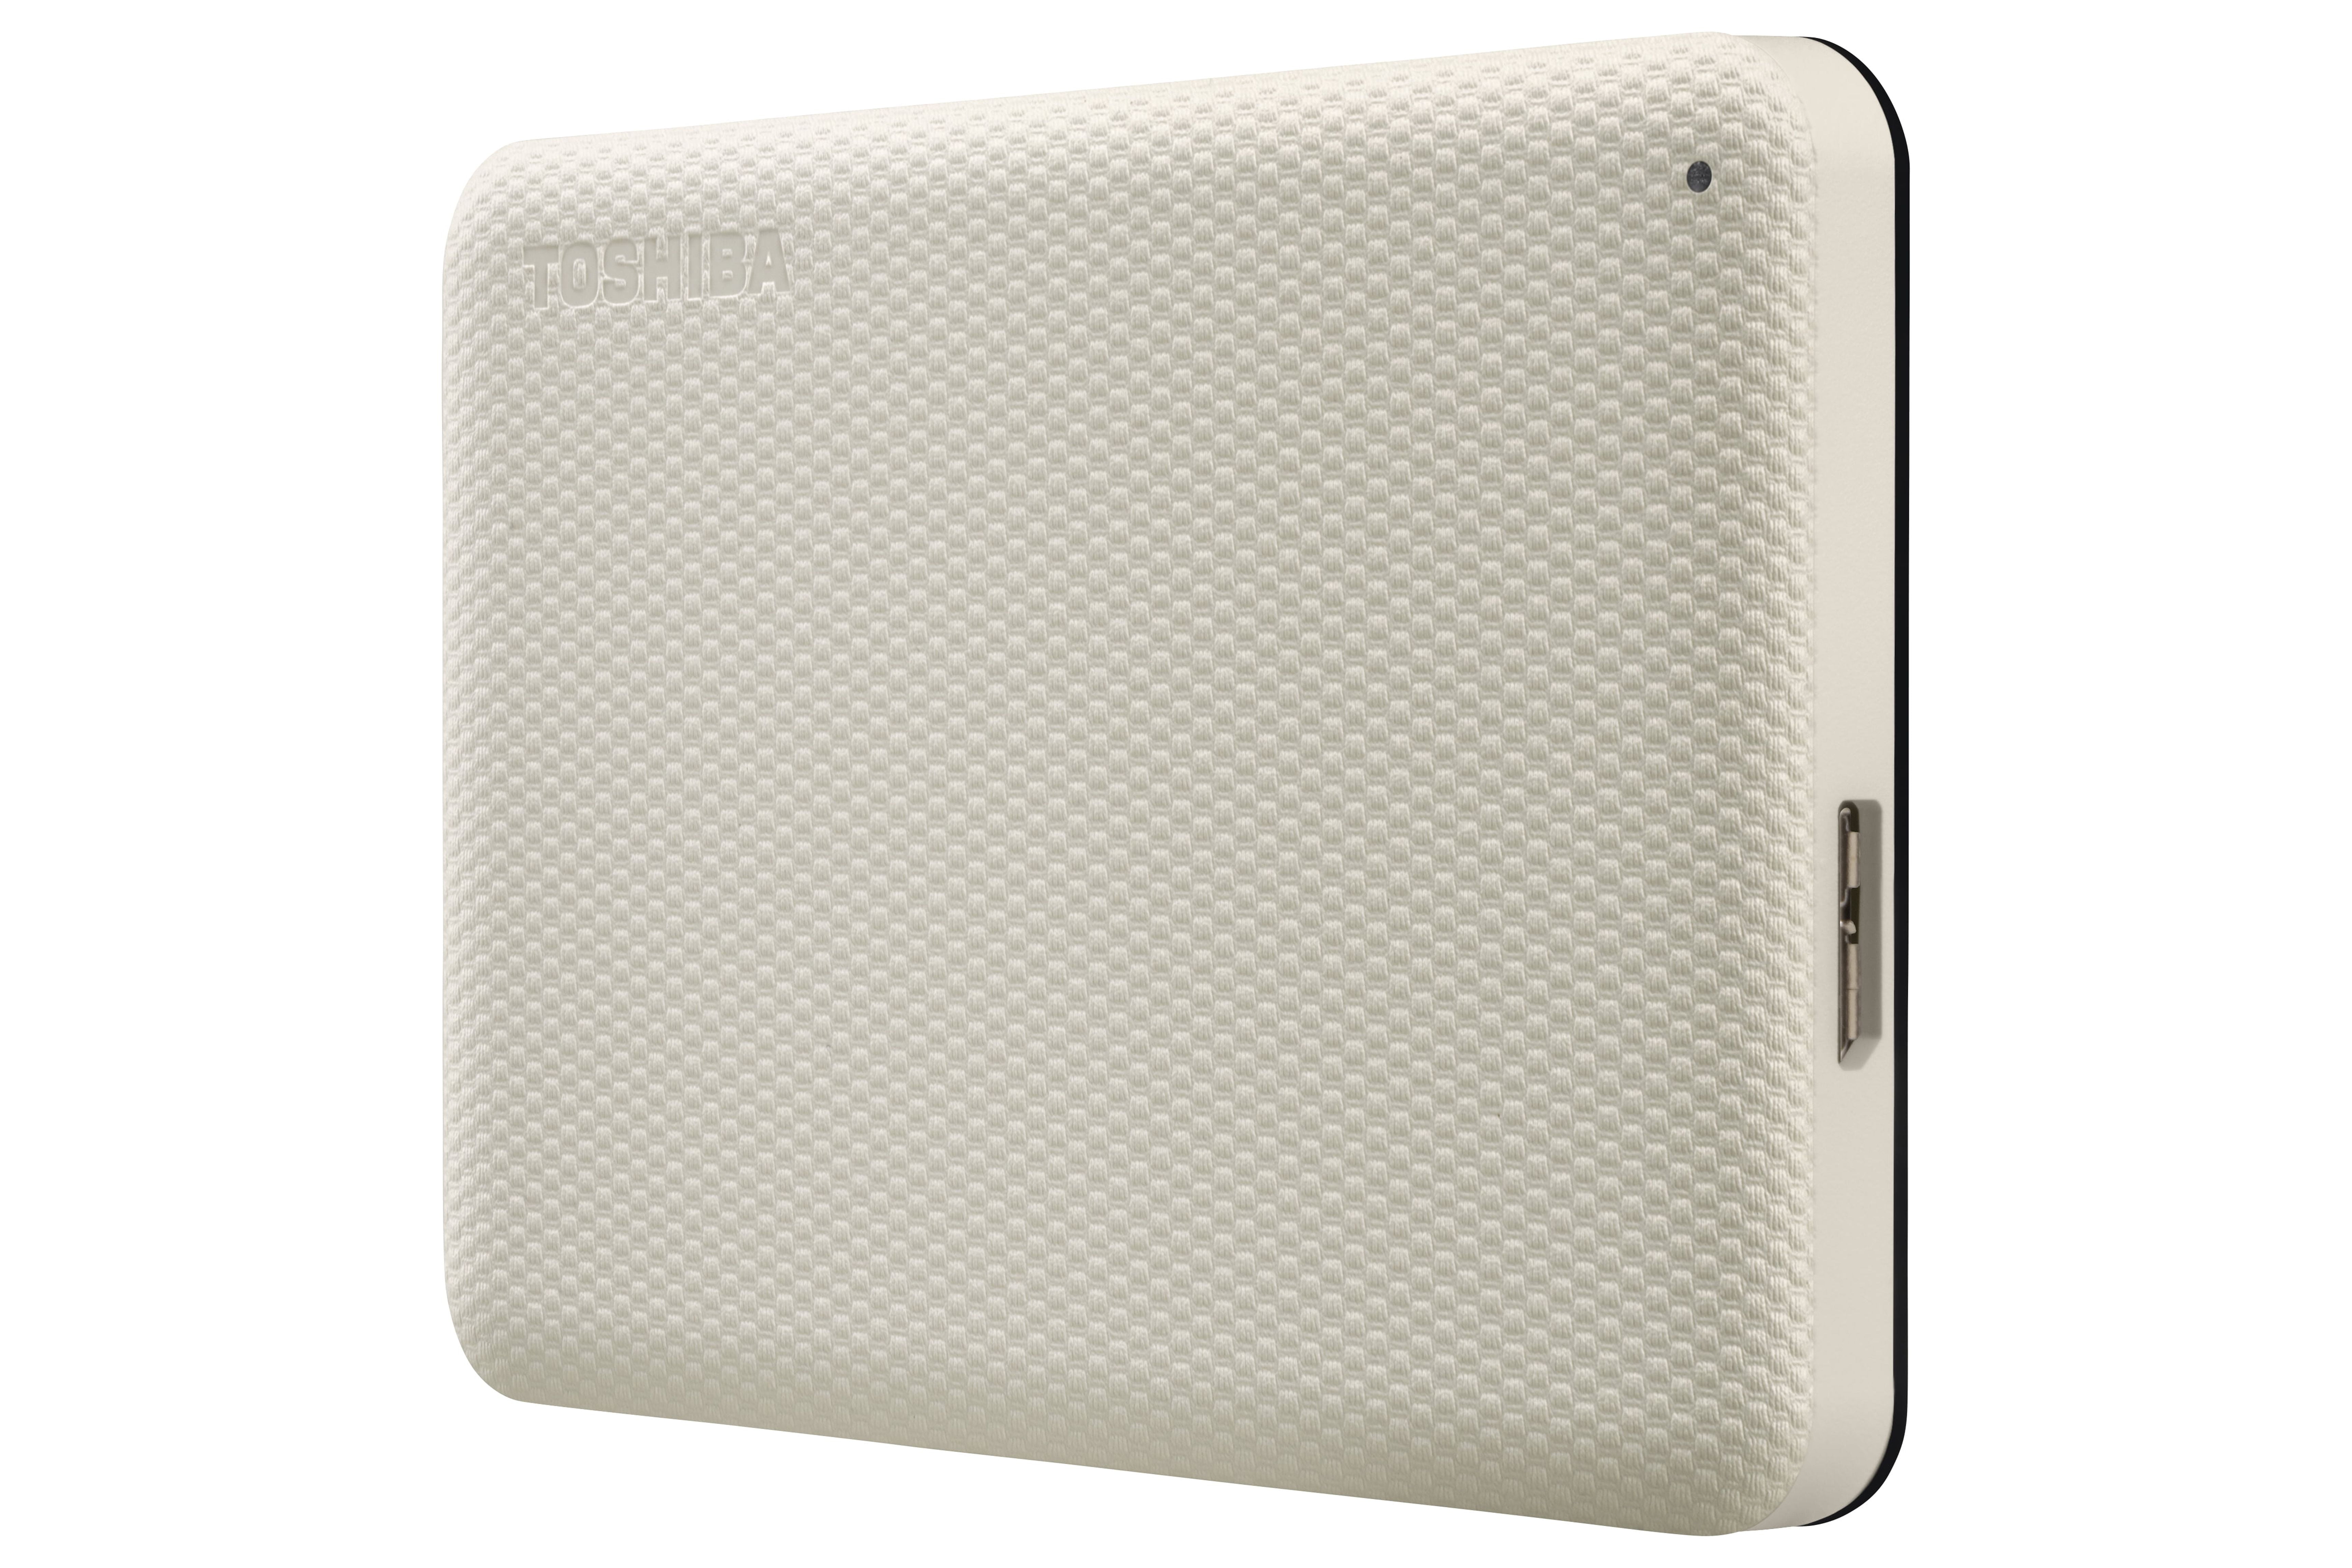 Toshiba CANVIO Advance 2TB Hard External Cables) - 3.0 - USB-C USB USB-A Drive White both Portable (Includes and Plus